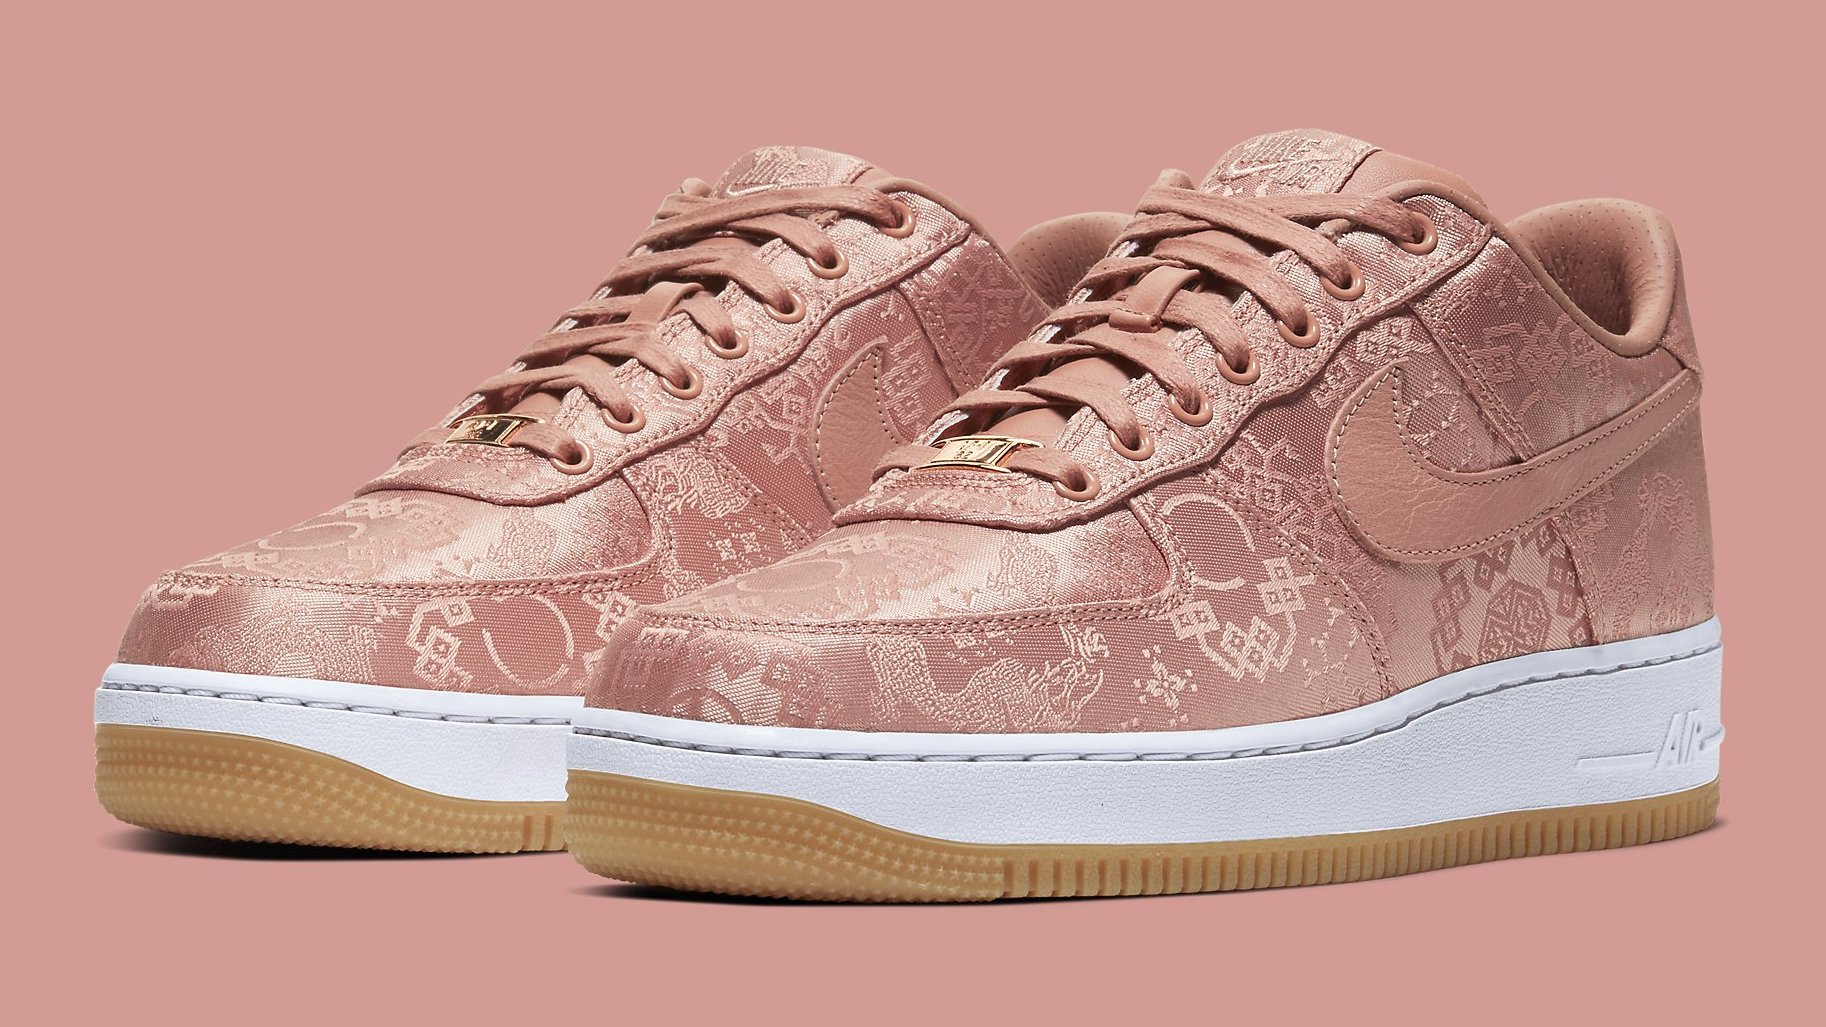 R gebrek grip Clot's 'Rose Gold' Nike Air Force 1 Low Is Releasing This Month | Complex